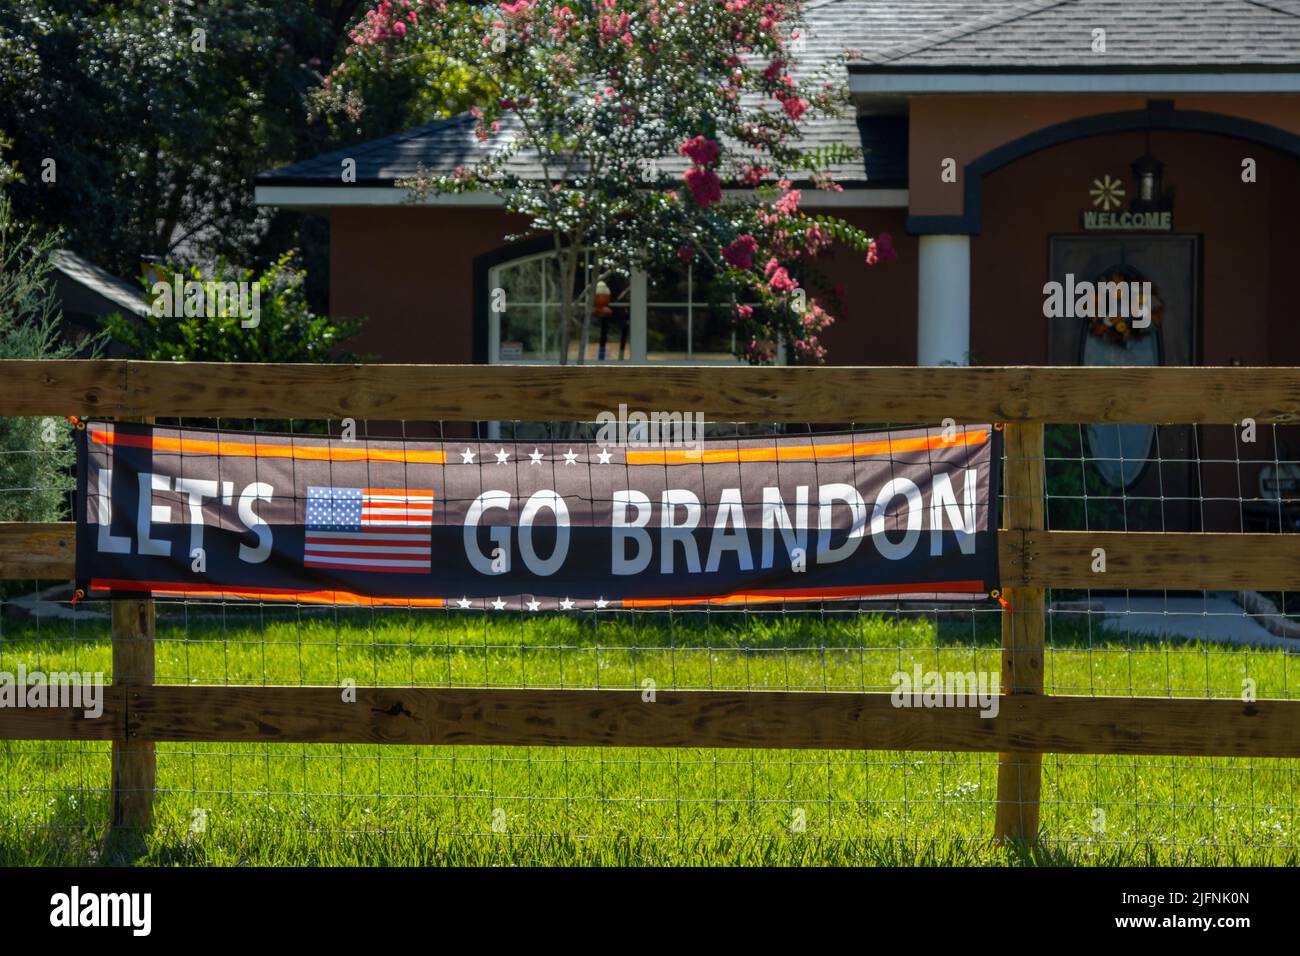 Let's Go Brandon sign on the fence of a Florida home. Stock Photo